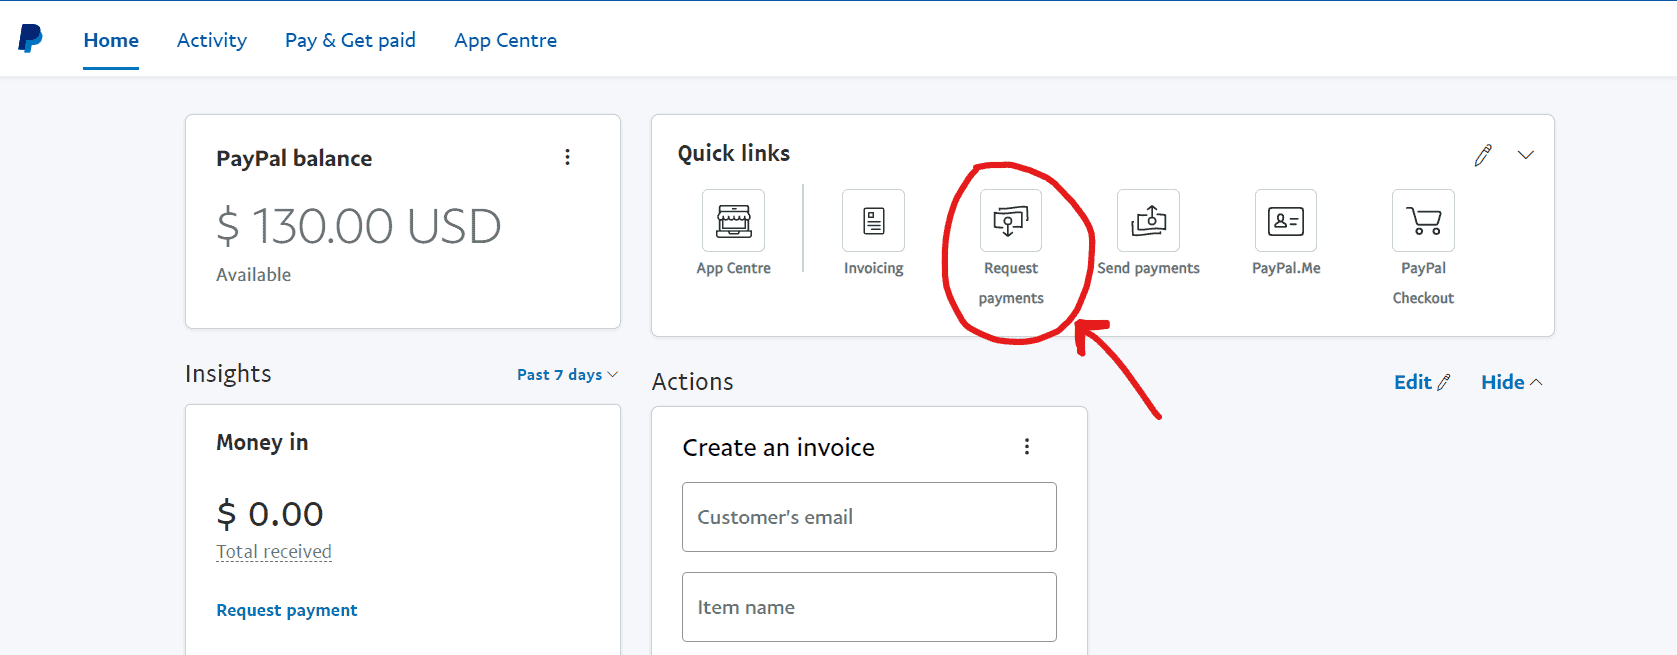 Paypal payment requests